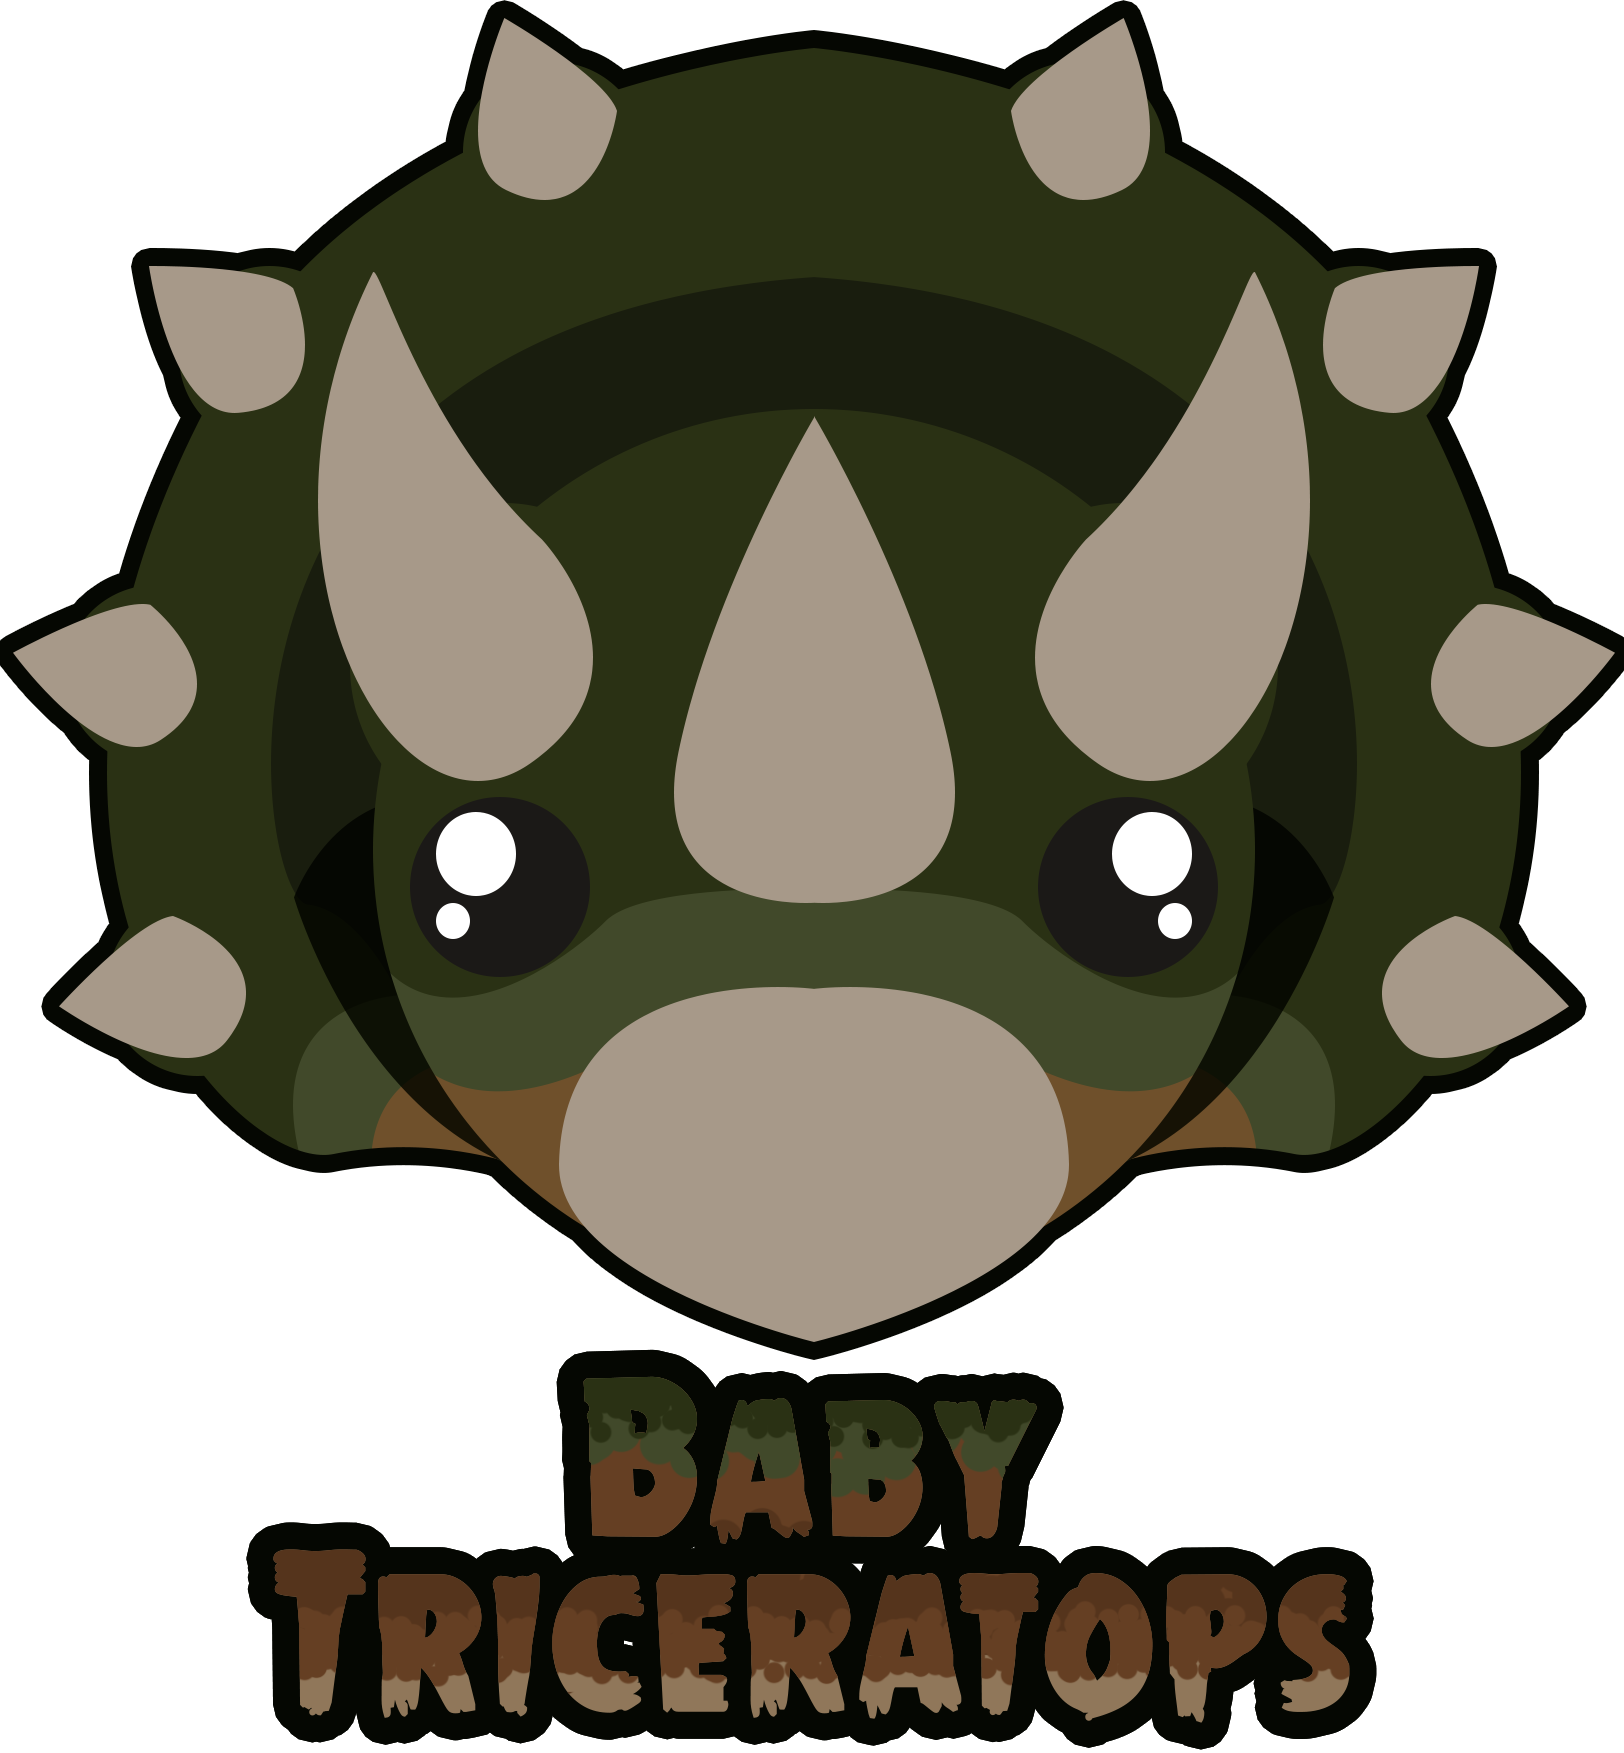 Info - Baby Triceratops (1624x1753)